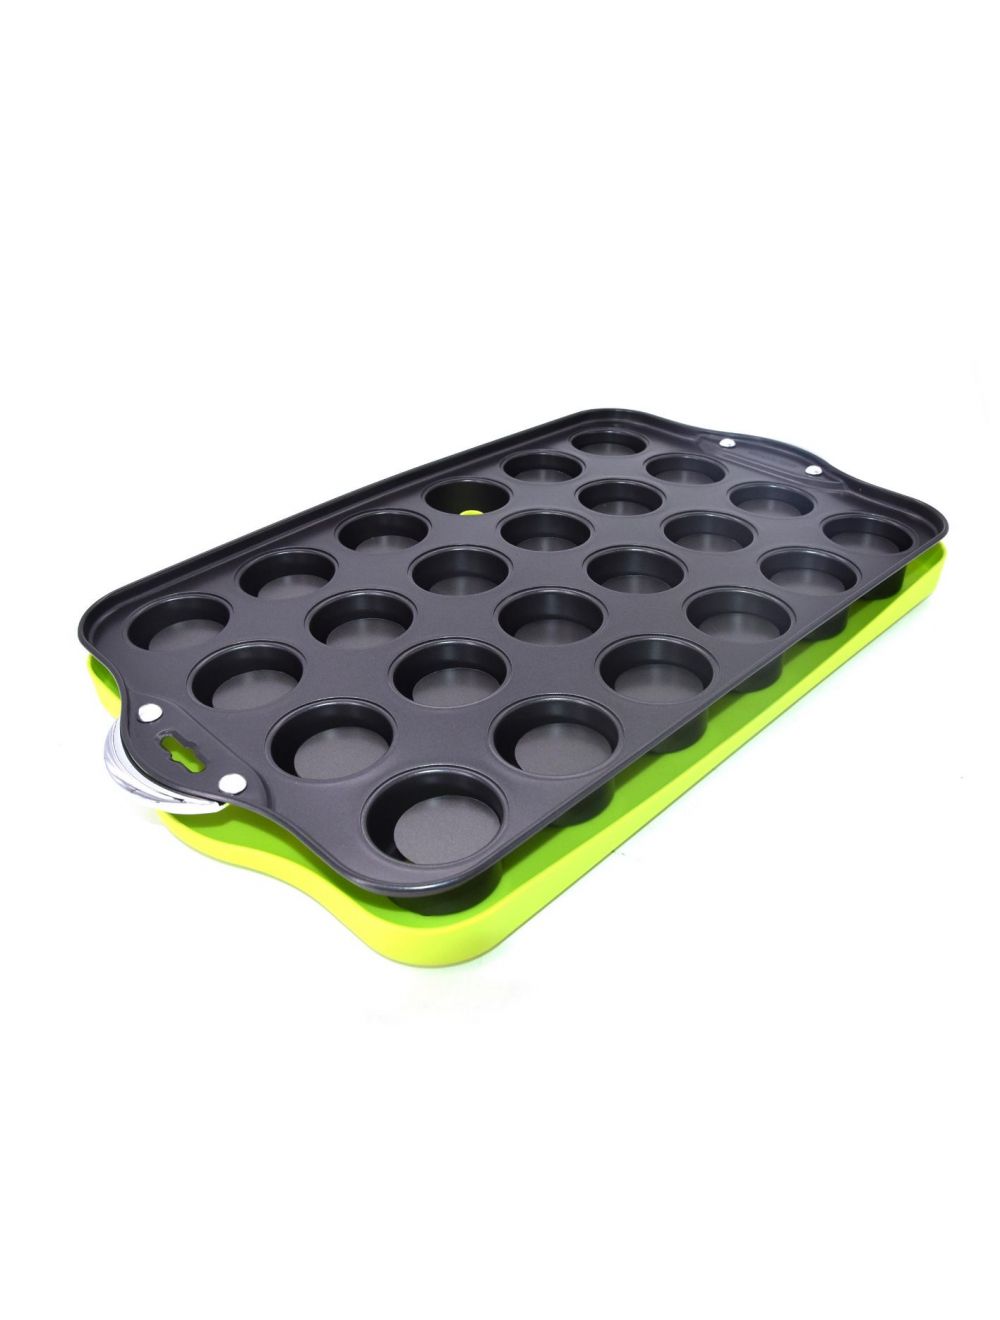 Muffin Pan 24 Cup Division 48.5x27x4.5 cm